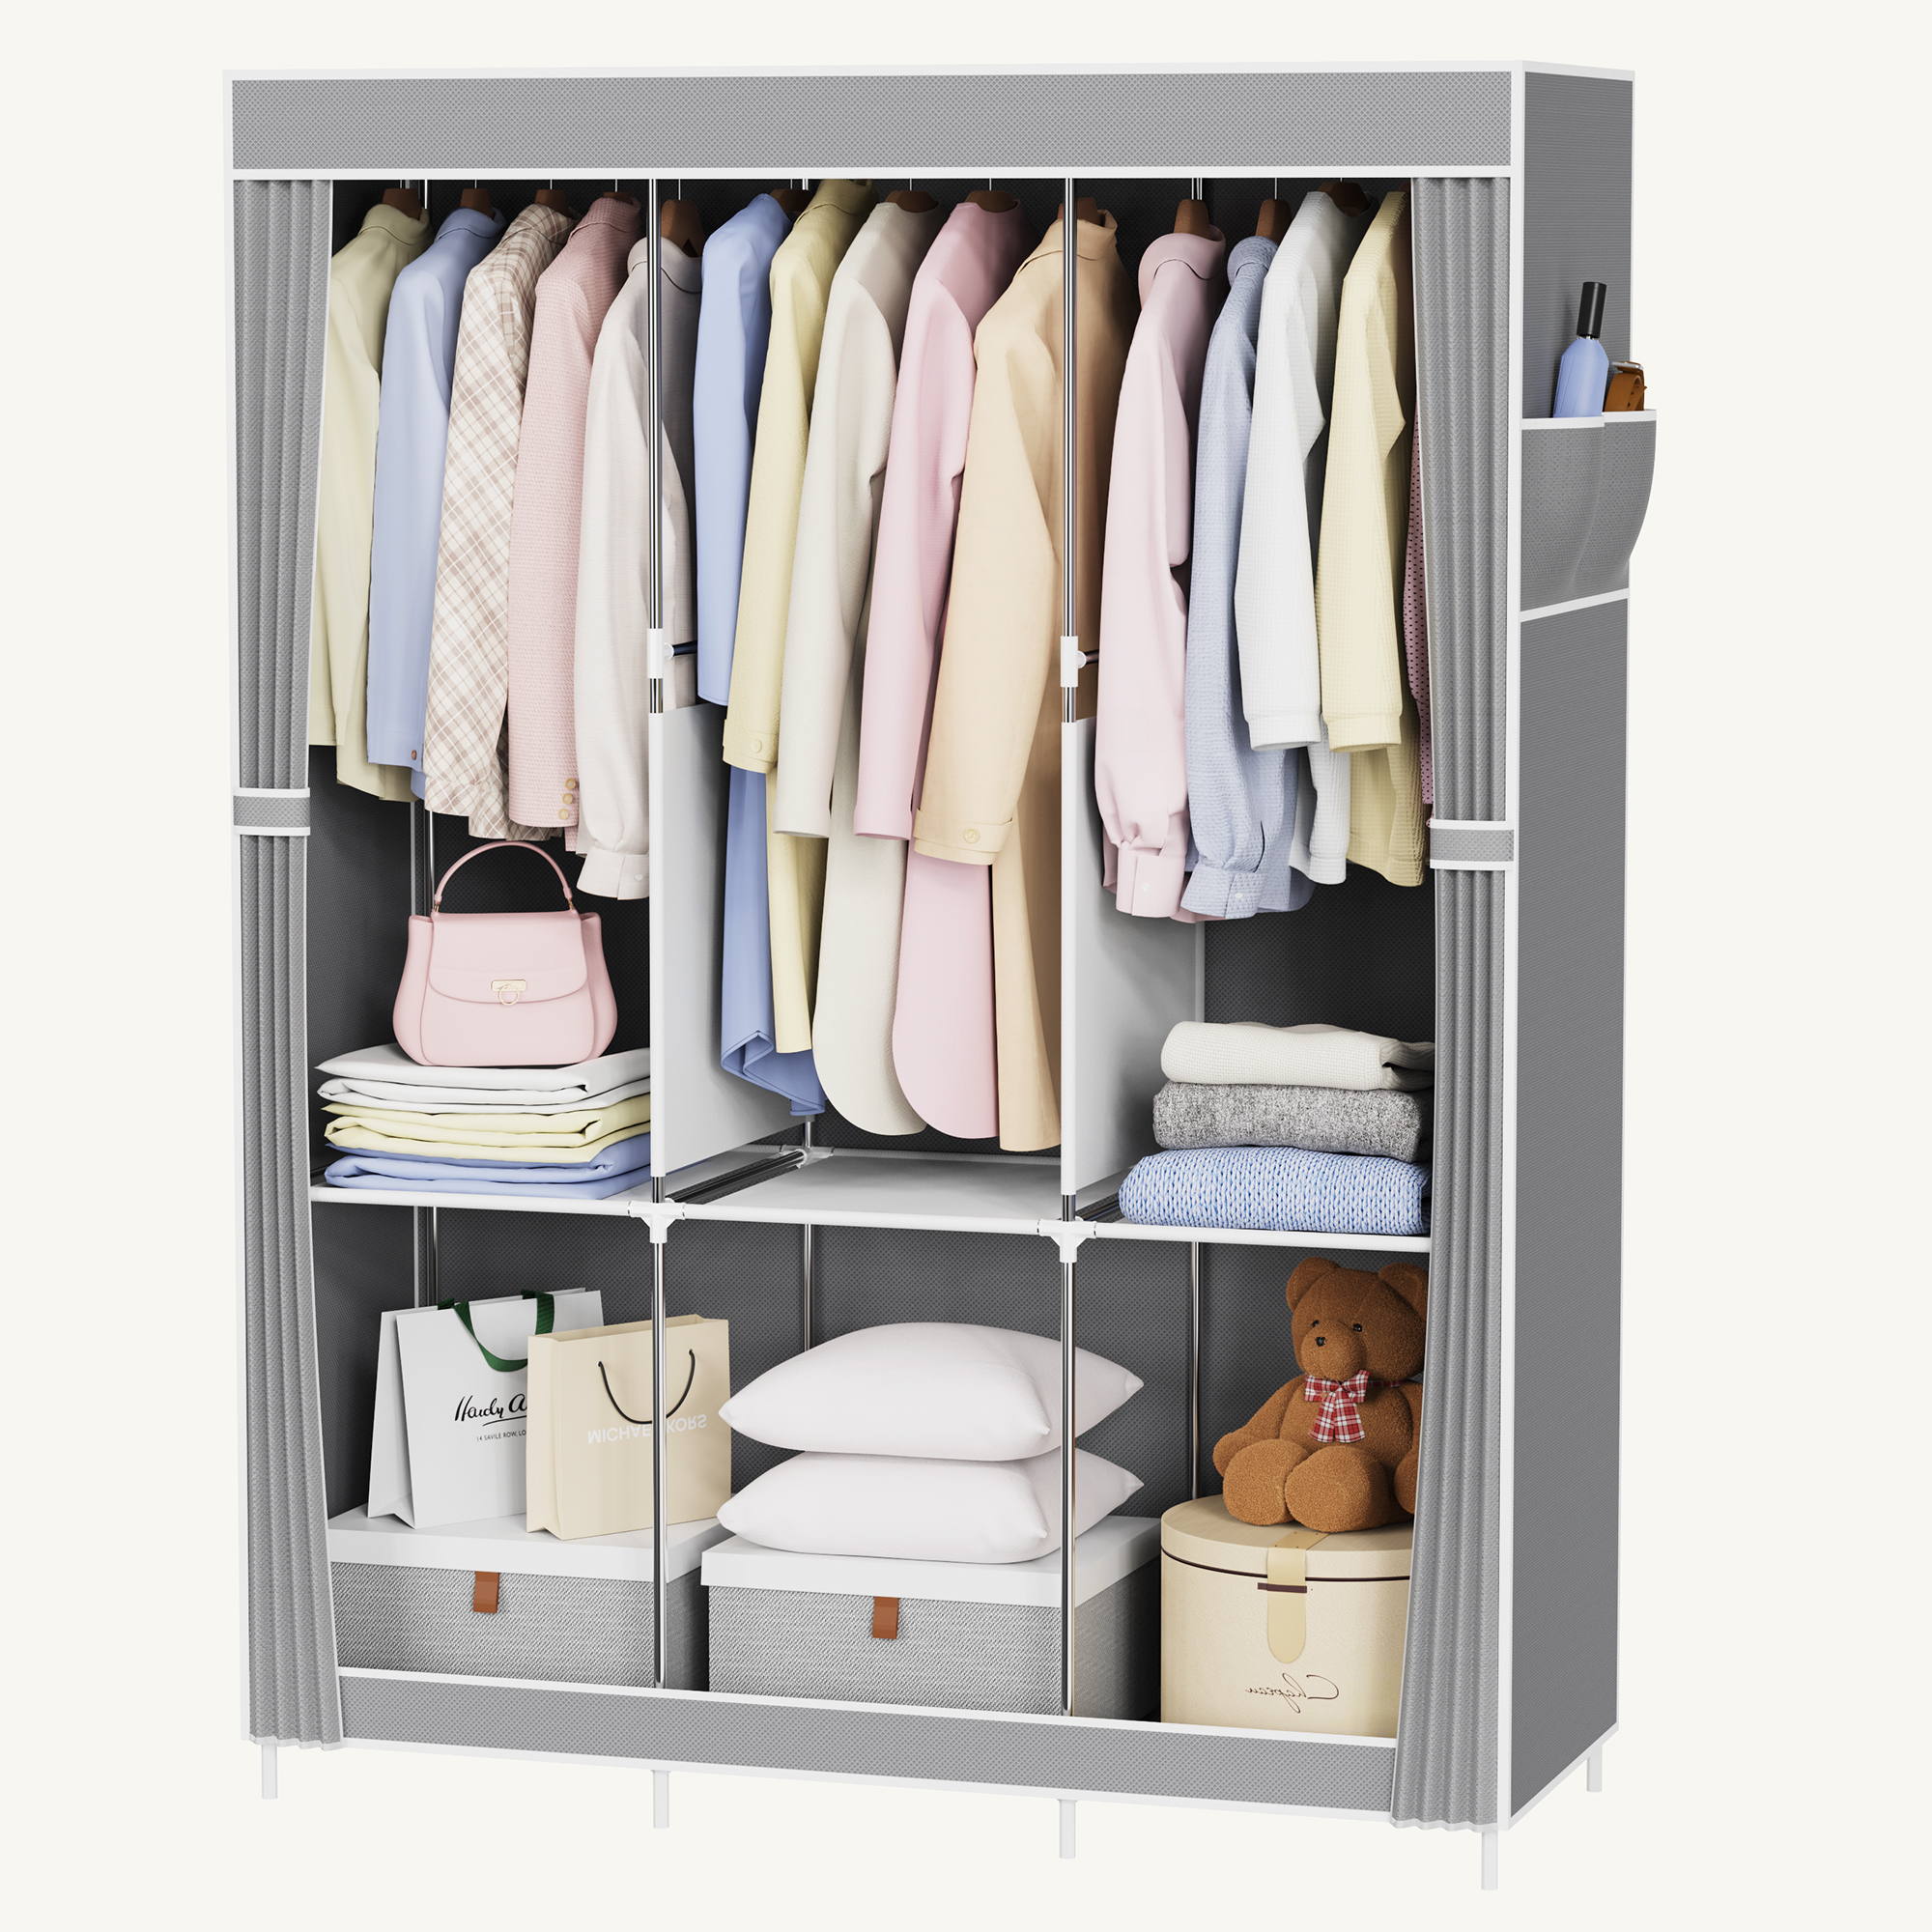 Riousery Portable Closet Wardrobe for Hanging Clothes  6 Storage Organizer Shelves Closet for Bedroom Free Standing Clothes Rack with Cover, Grey - image 1 of 7